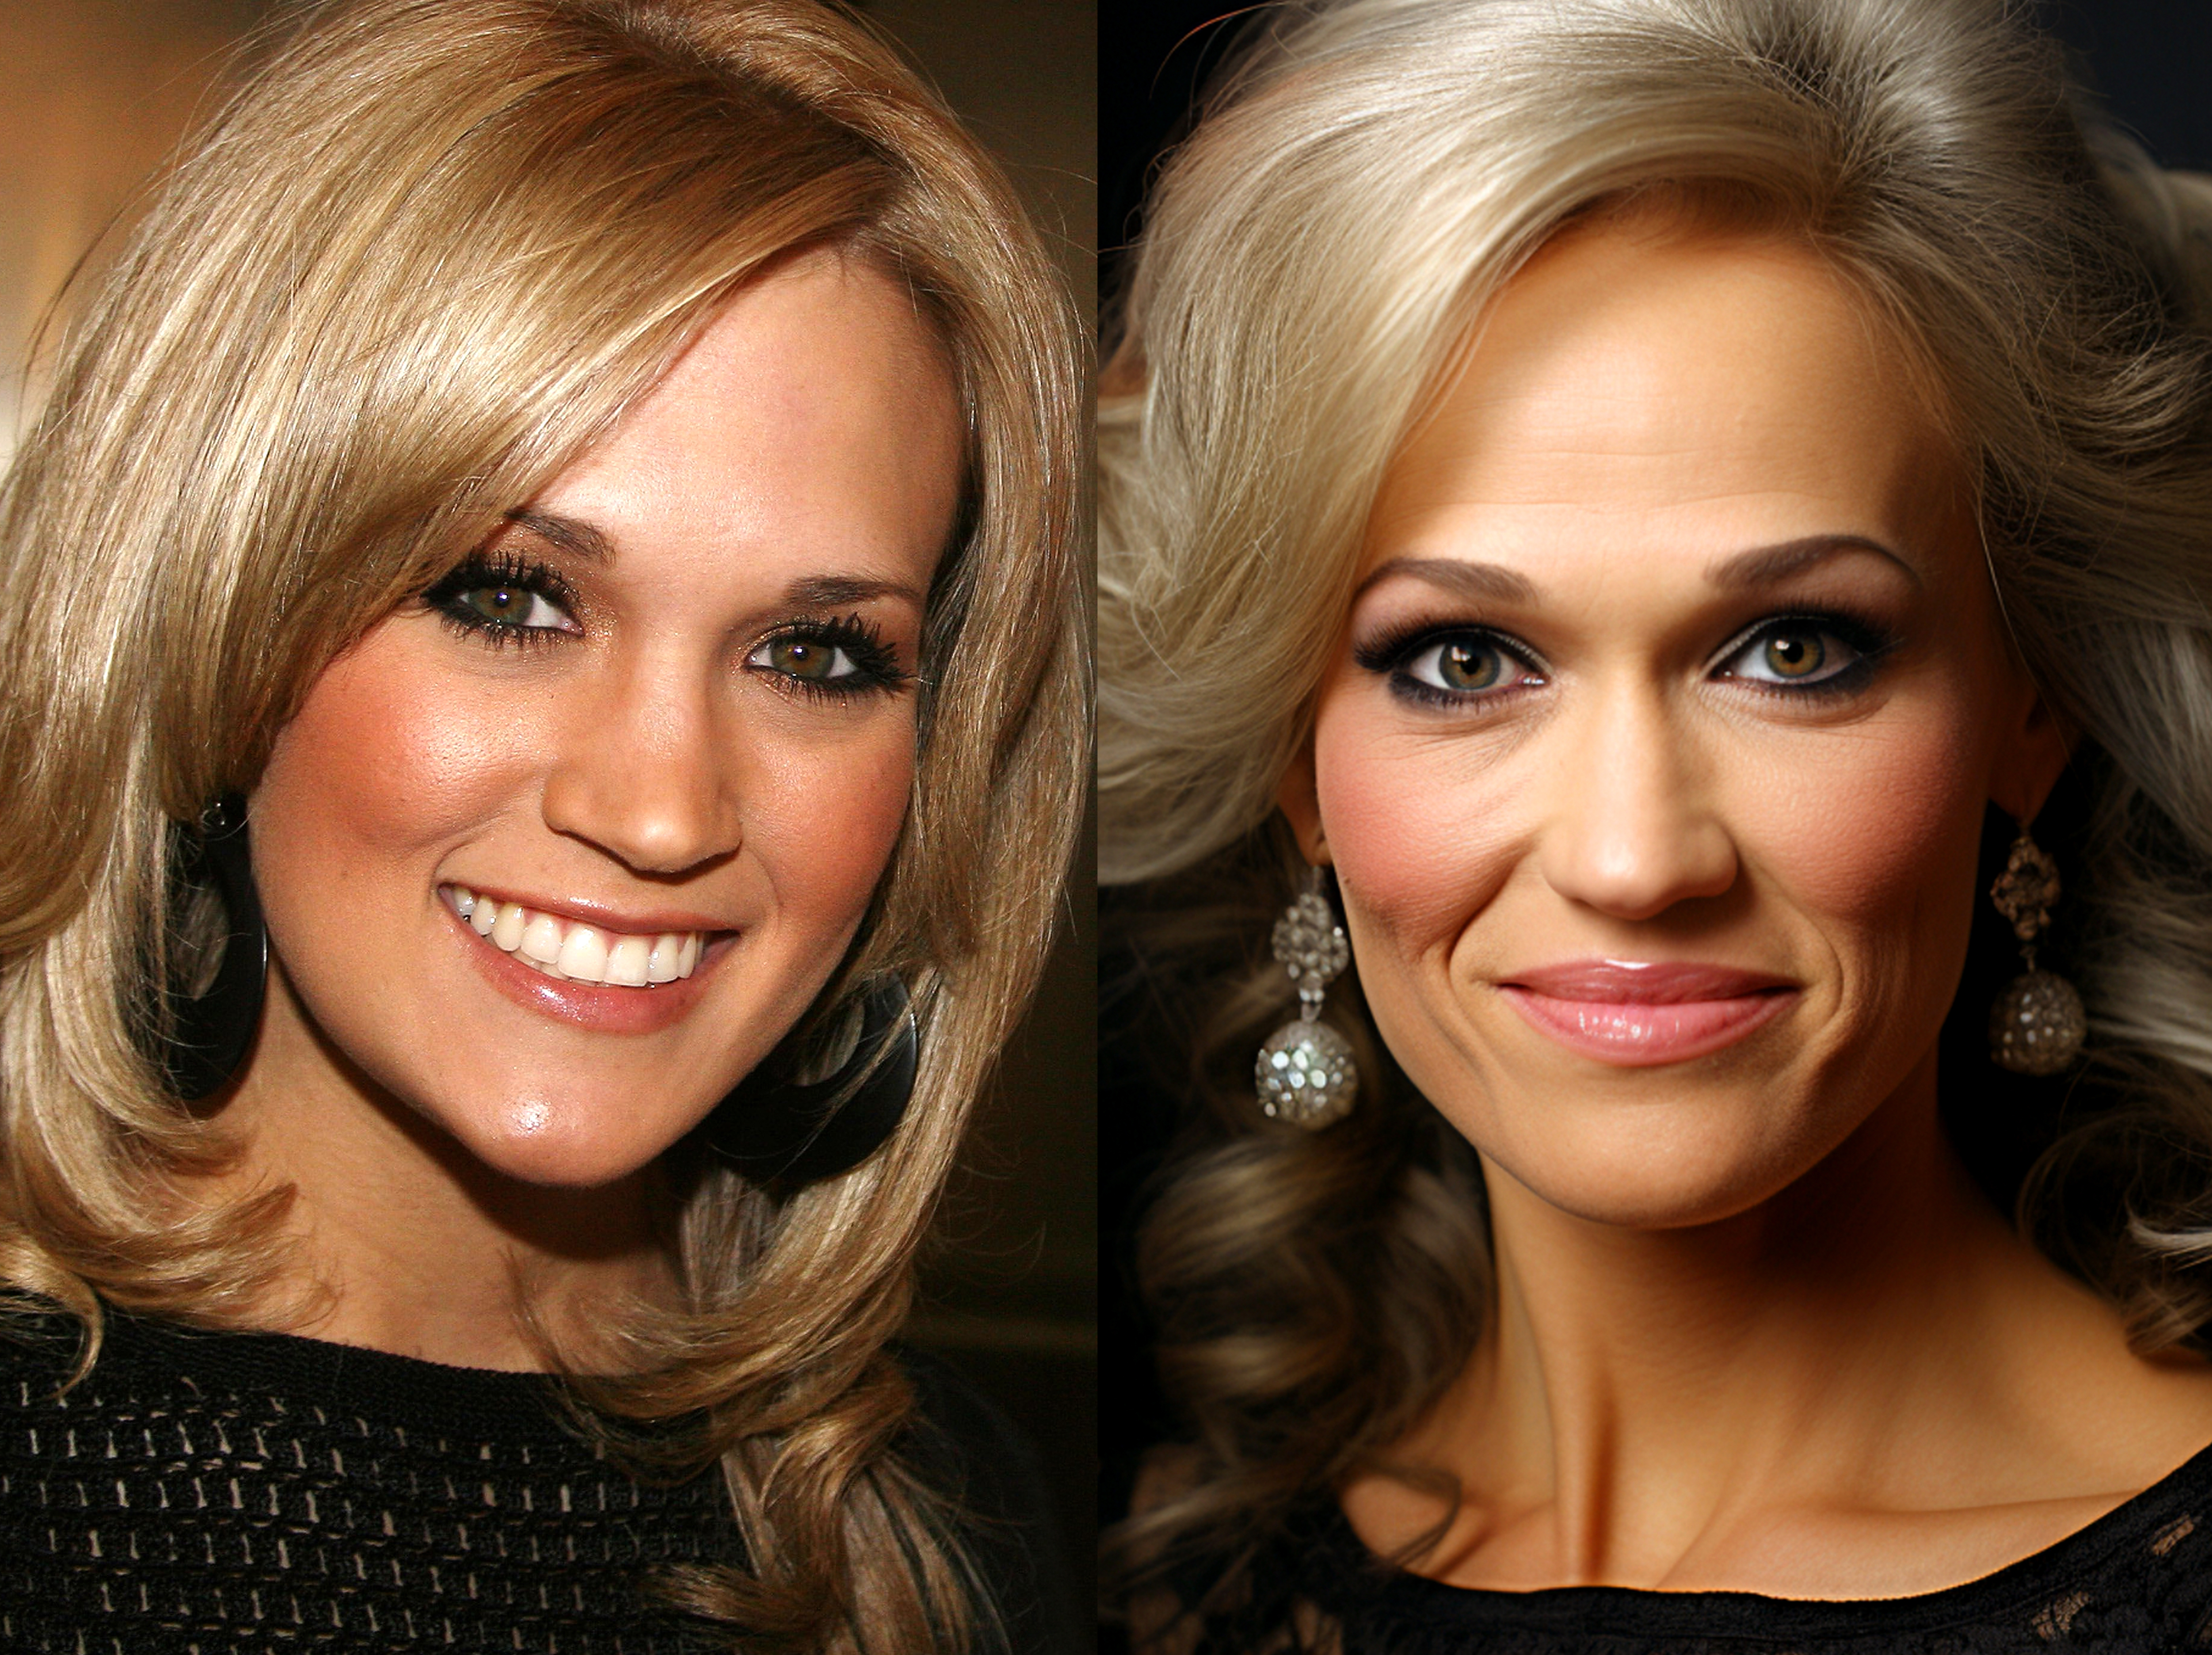 Carrie Underwood at "The Fantasticks" event in New York City in 2007. | How Carrie Underwood might look at 70 via AI | Sources: Getty Images | Midjourney